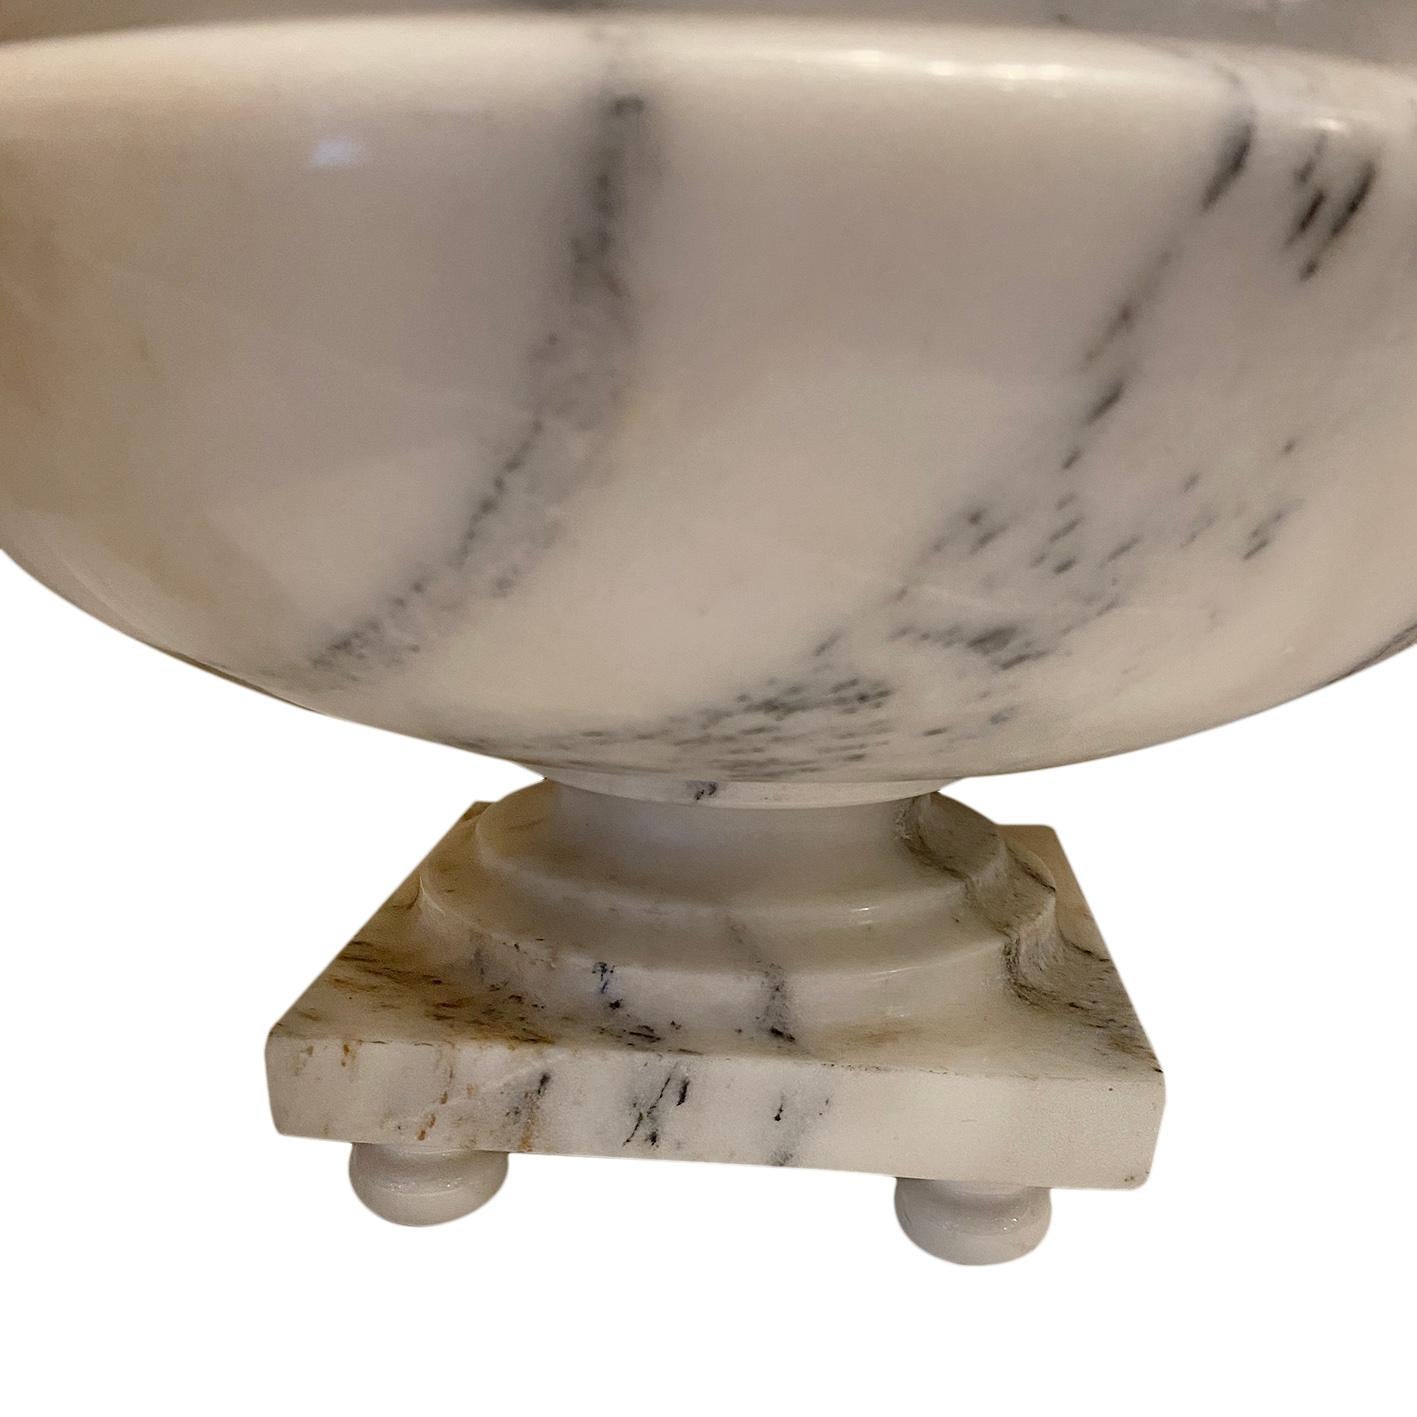 A pair of circa 1930's Italian carved alabaster pedestal 'fruit bowl' table lamps. These can also be modified as decorative objects without the lamp stem.

Measurements:
Height of body: 18